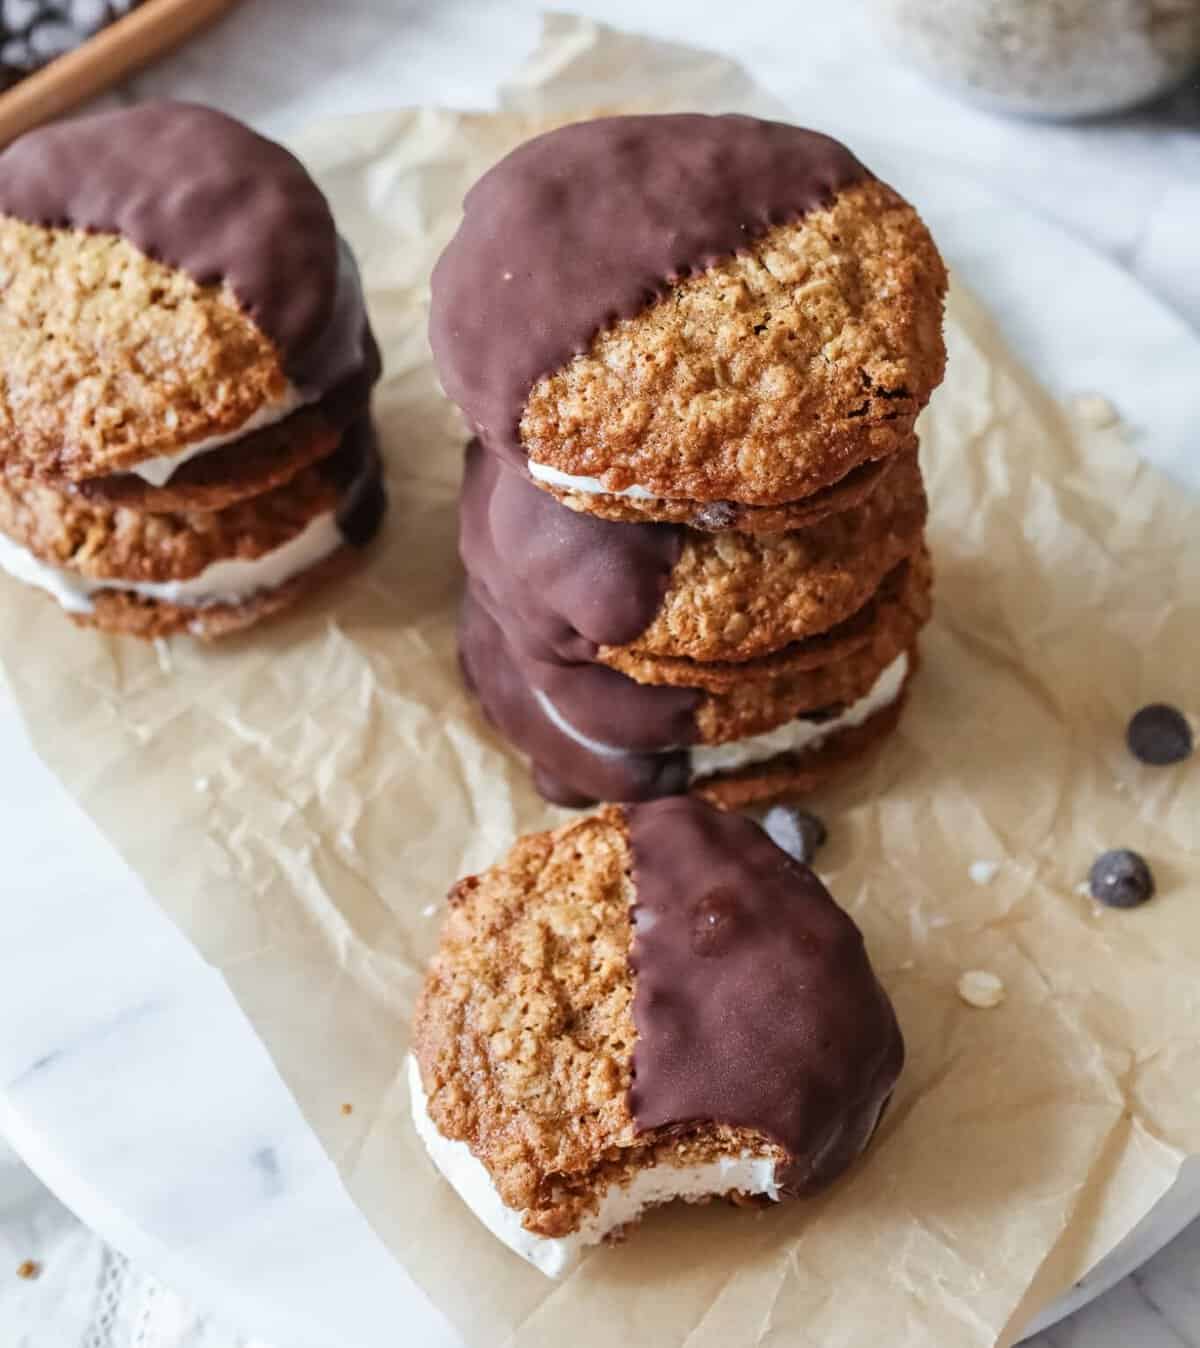 five copycat “IT’S-IT” ice cram sandwiches with oatmeal raisin cookies one with a bite out, from A Girl Defloured